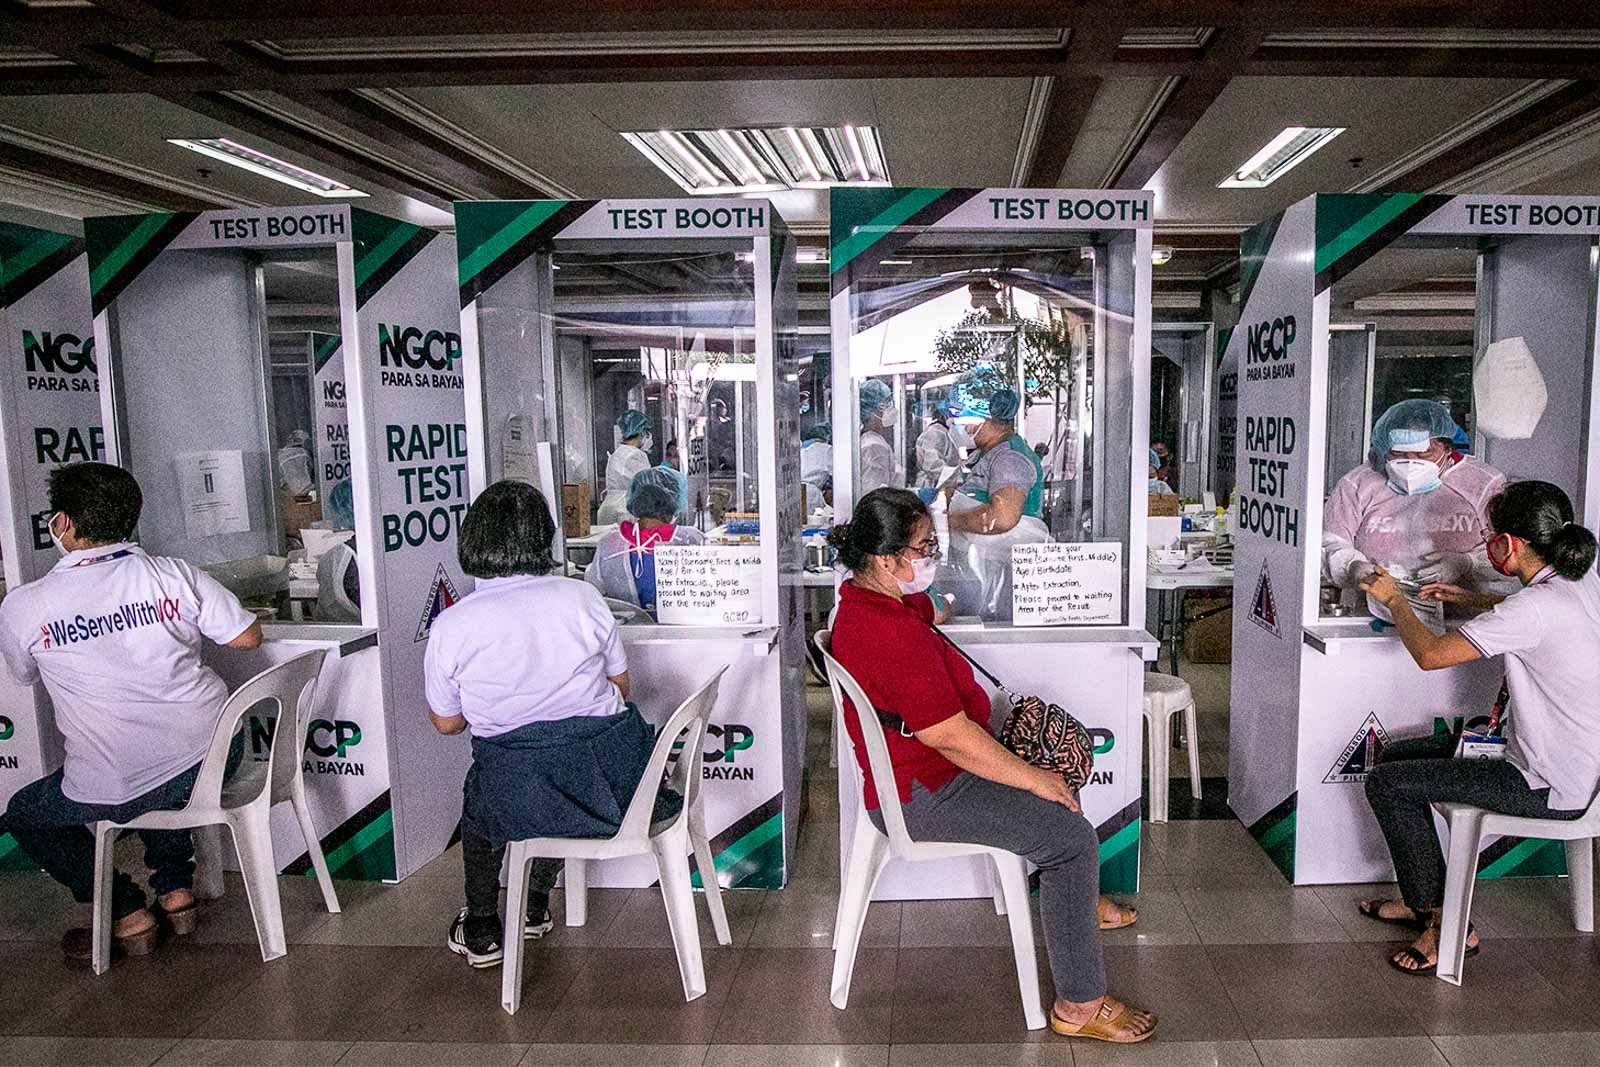 RAPID TESTS. The Quezon City Government puts up COVID-19 Rapid mass testing booths at the city hall on Wednesday, July 1, 2020, for its trace-isolate-treat strategy in combating COVID-19. Photo by Darren Langit/Rappler 